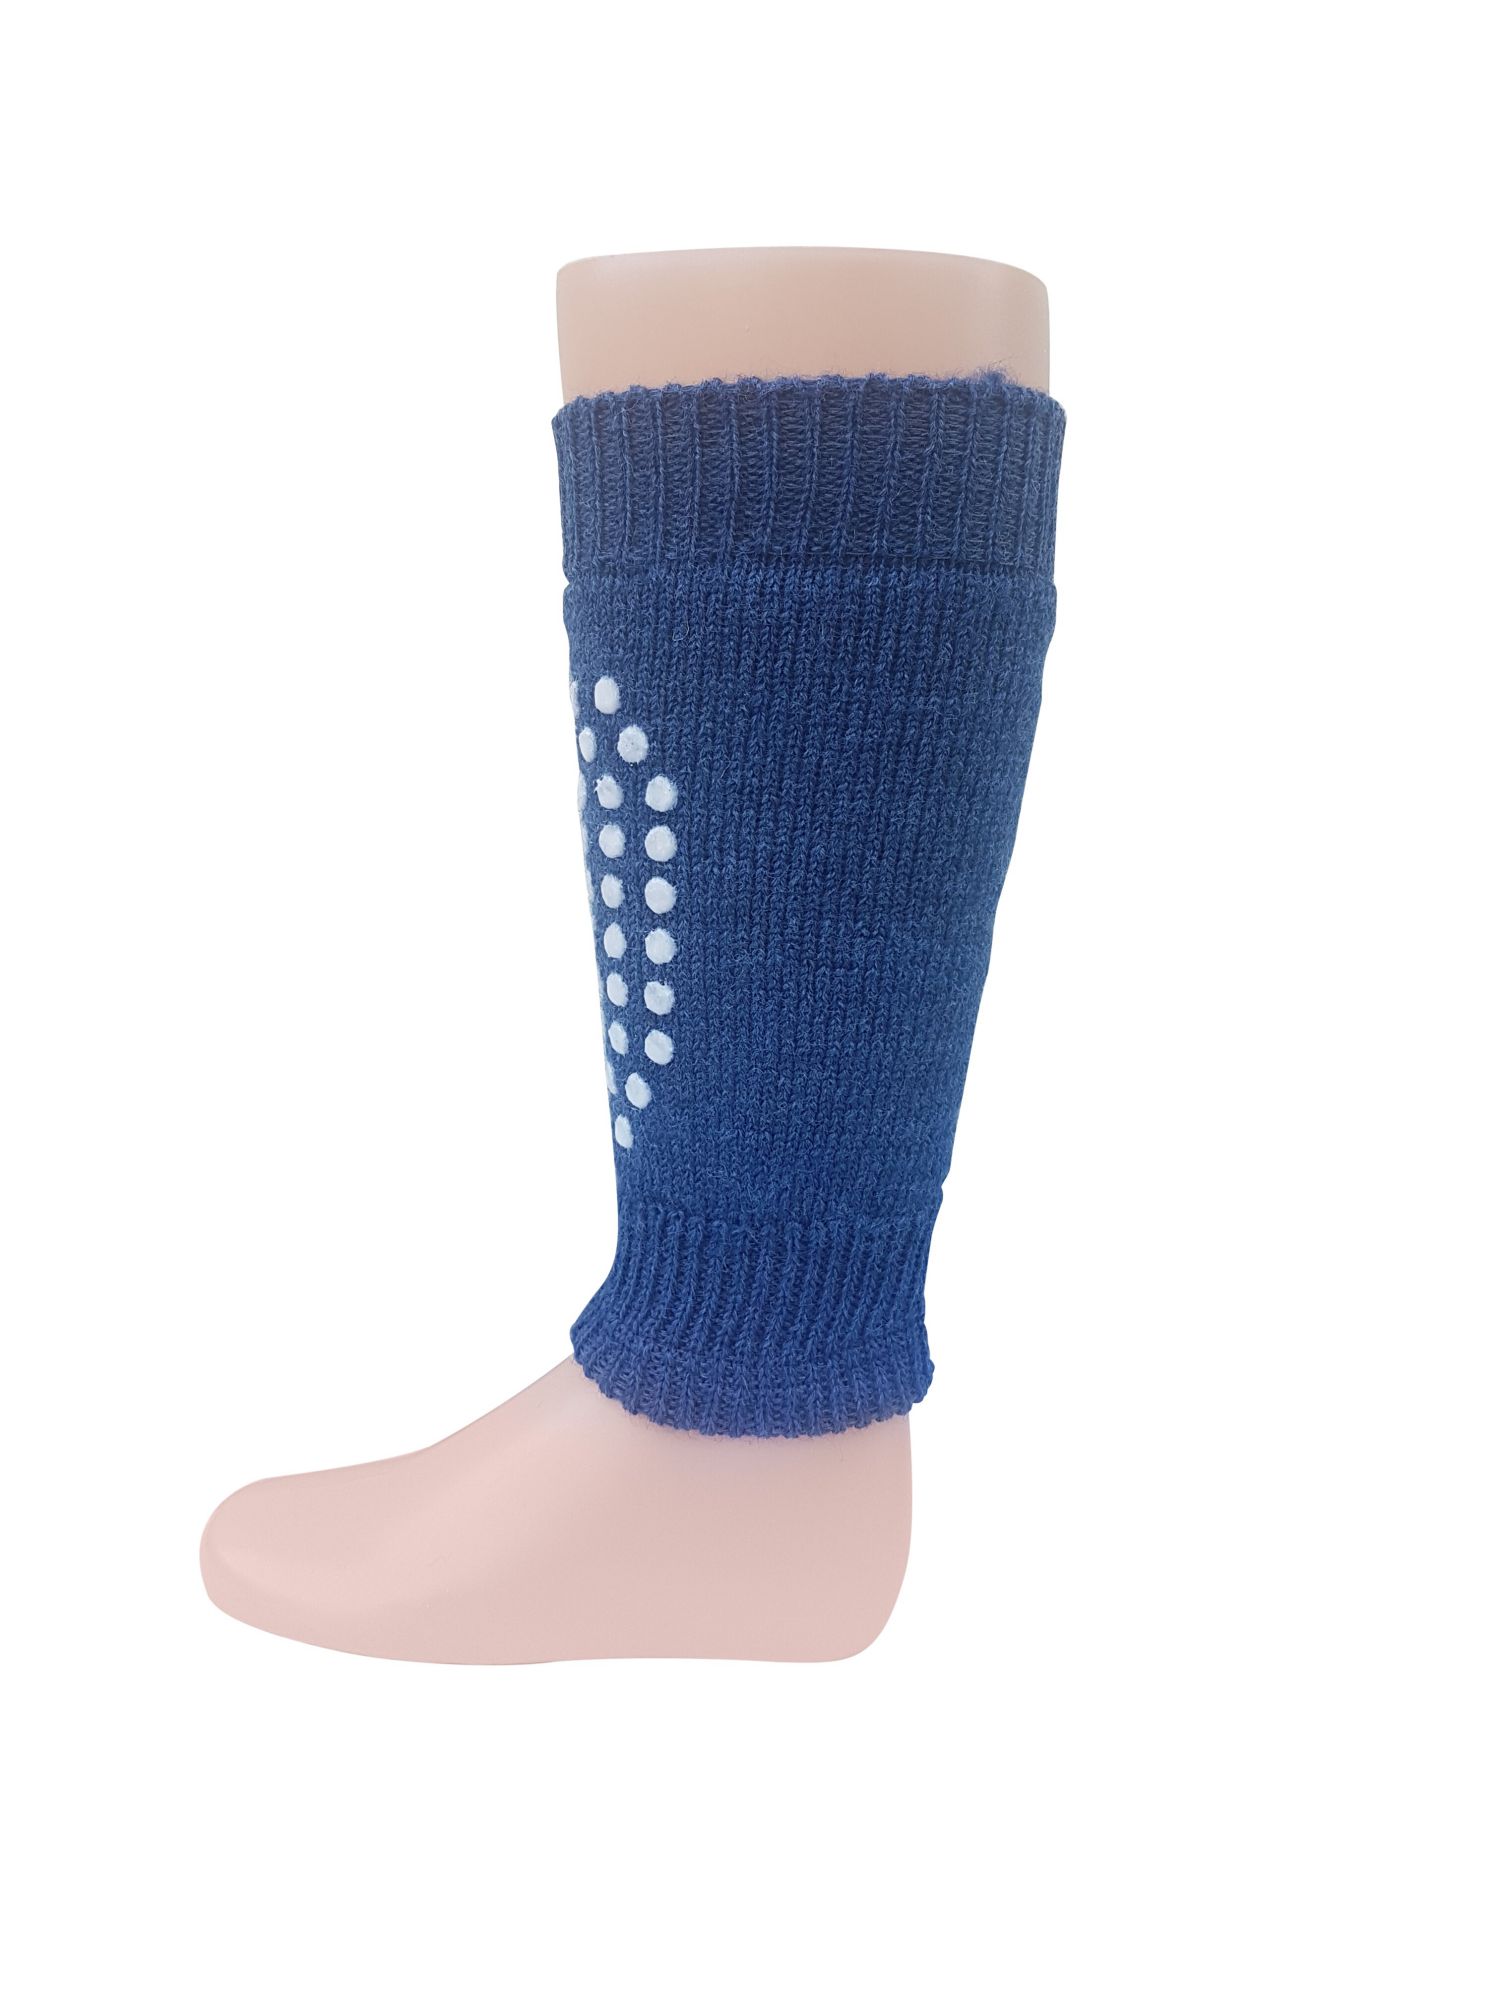 Hirsch Wool Leg Warmers with Silicon Stoppers